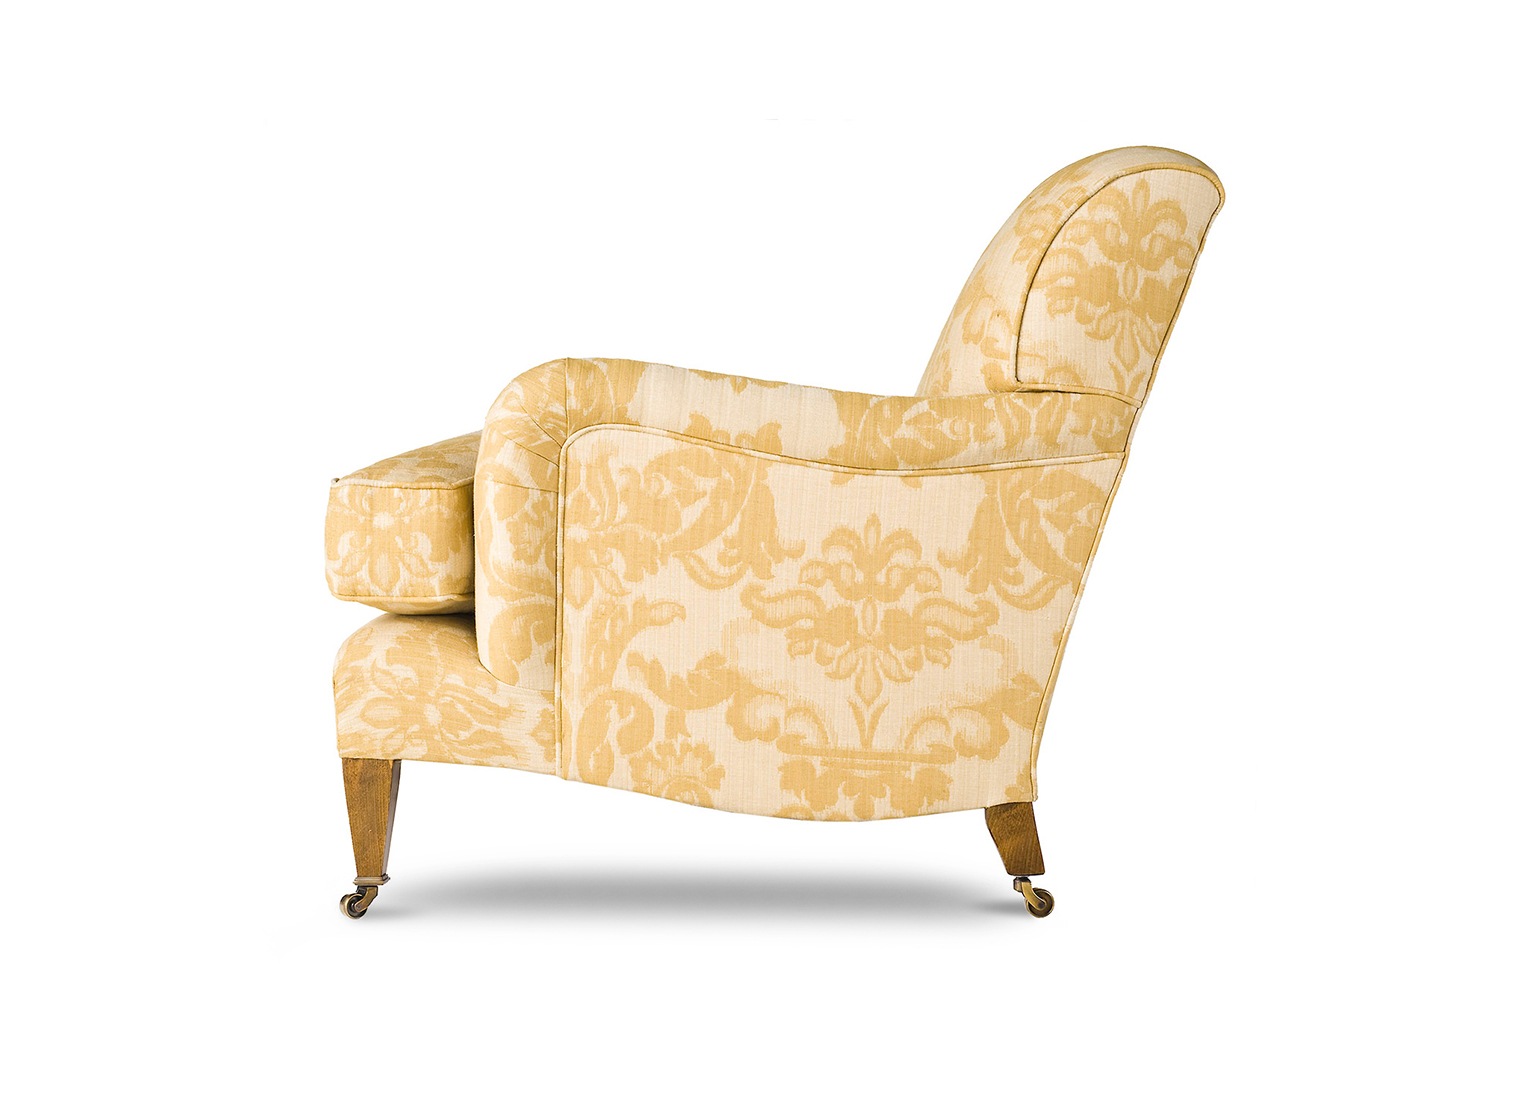 Brooke 2 seater sofa in Wicklow damask - Maize - Beaumont & Fletcher